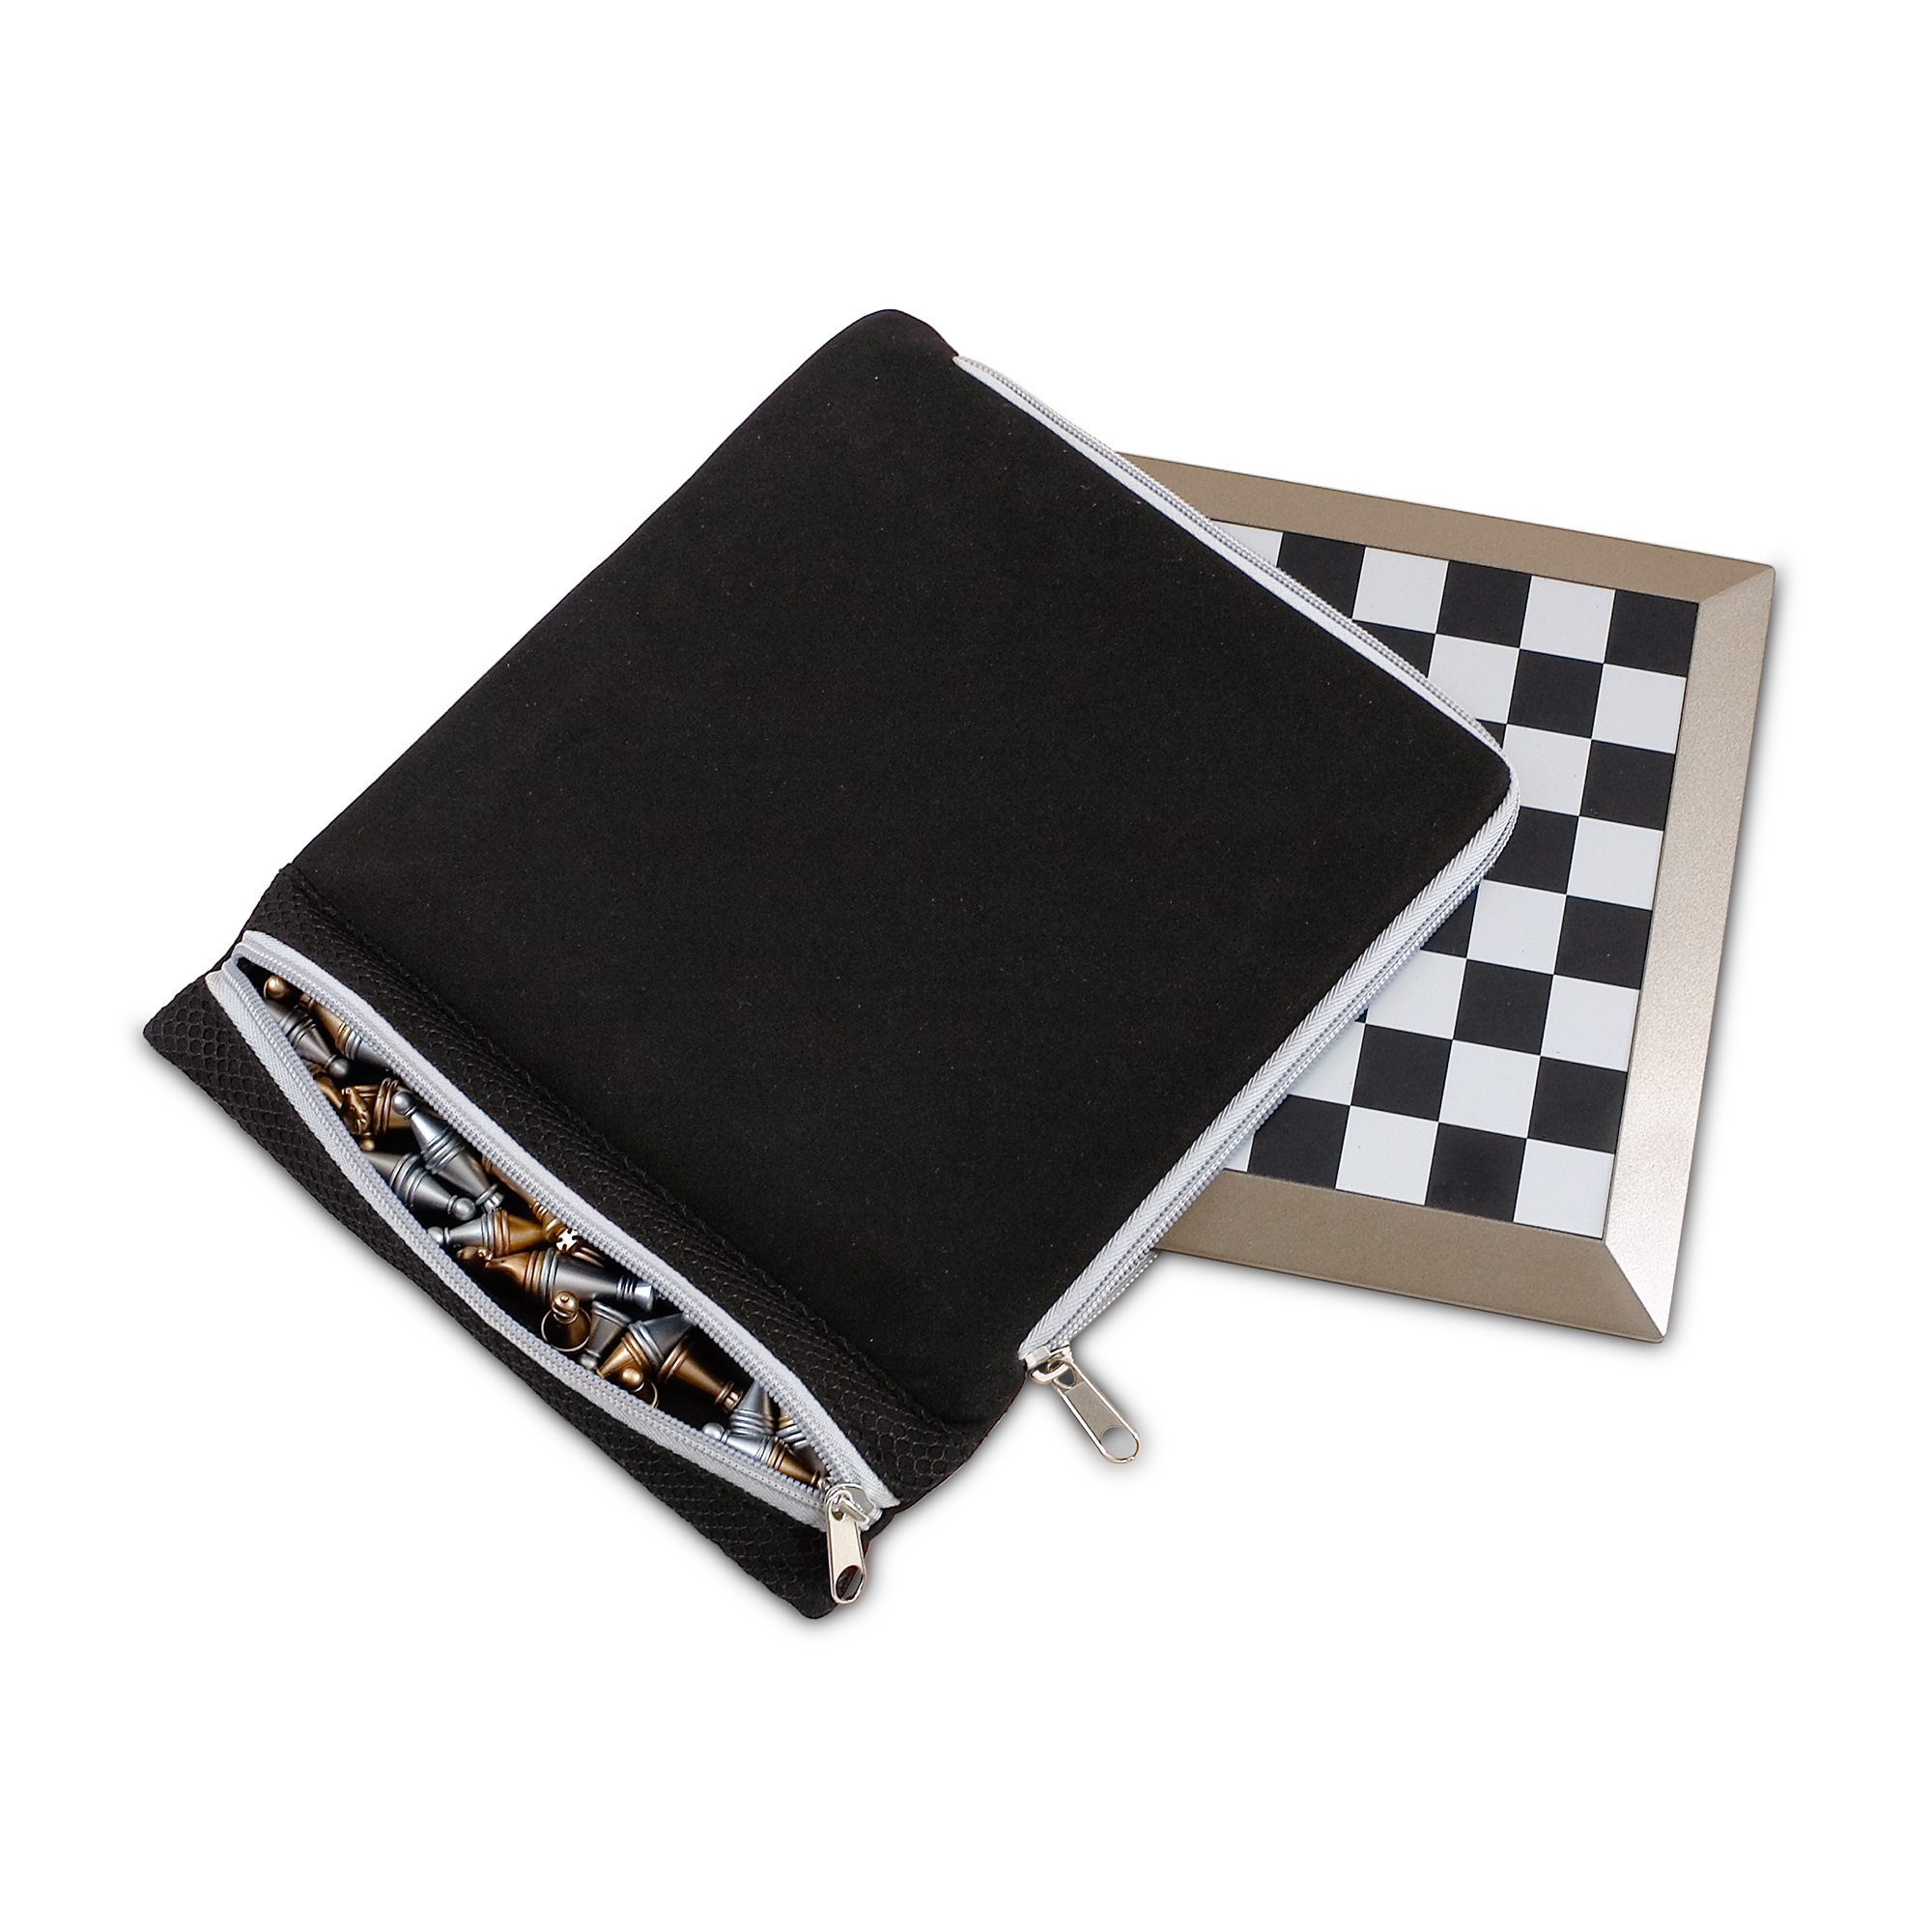 3882 Plastic Magnetic Chess Set With Carrying Case